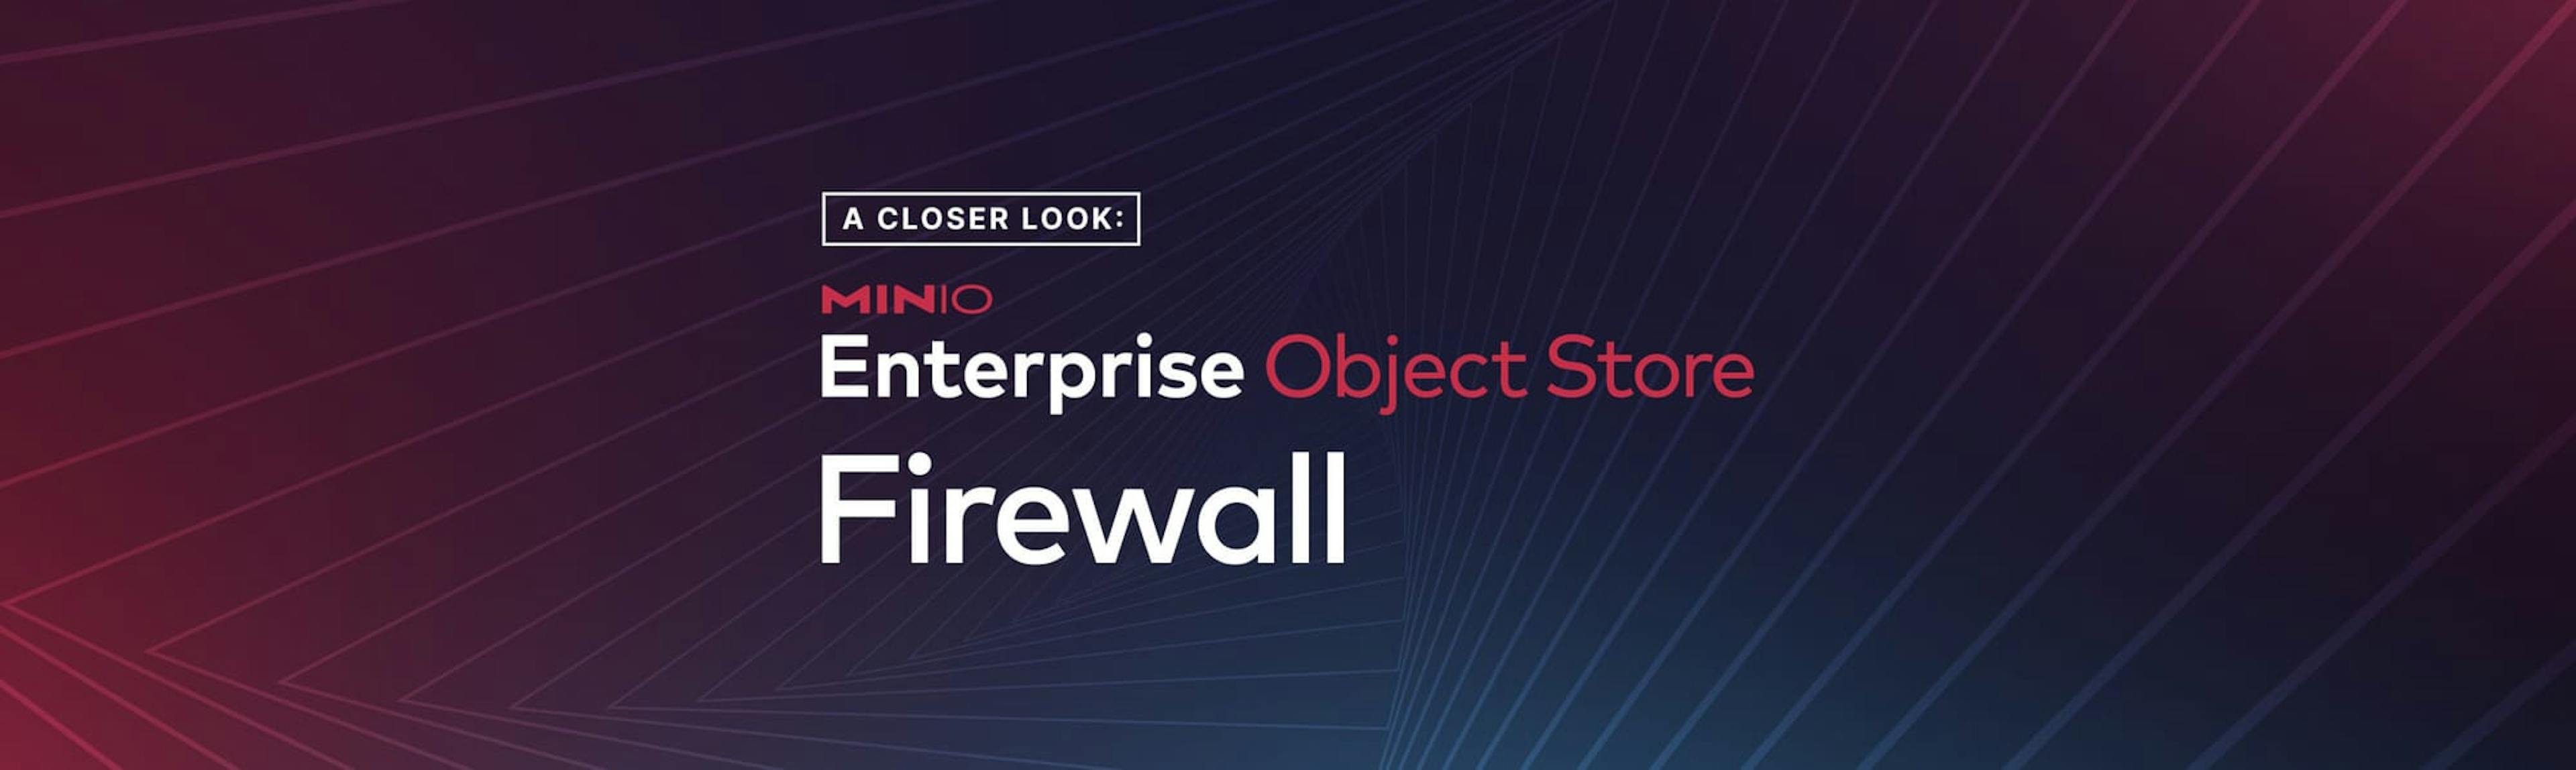 featured image - A Closer Look Into the MinIO Enterprise Object Store Firewall